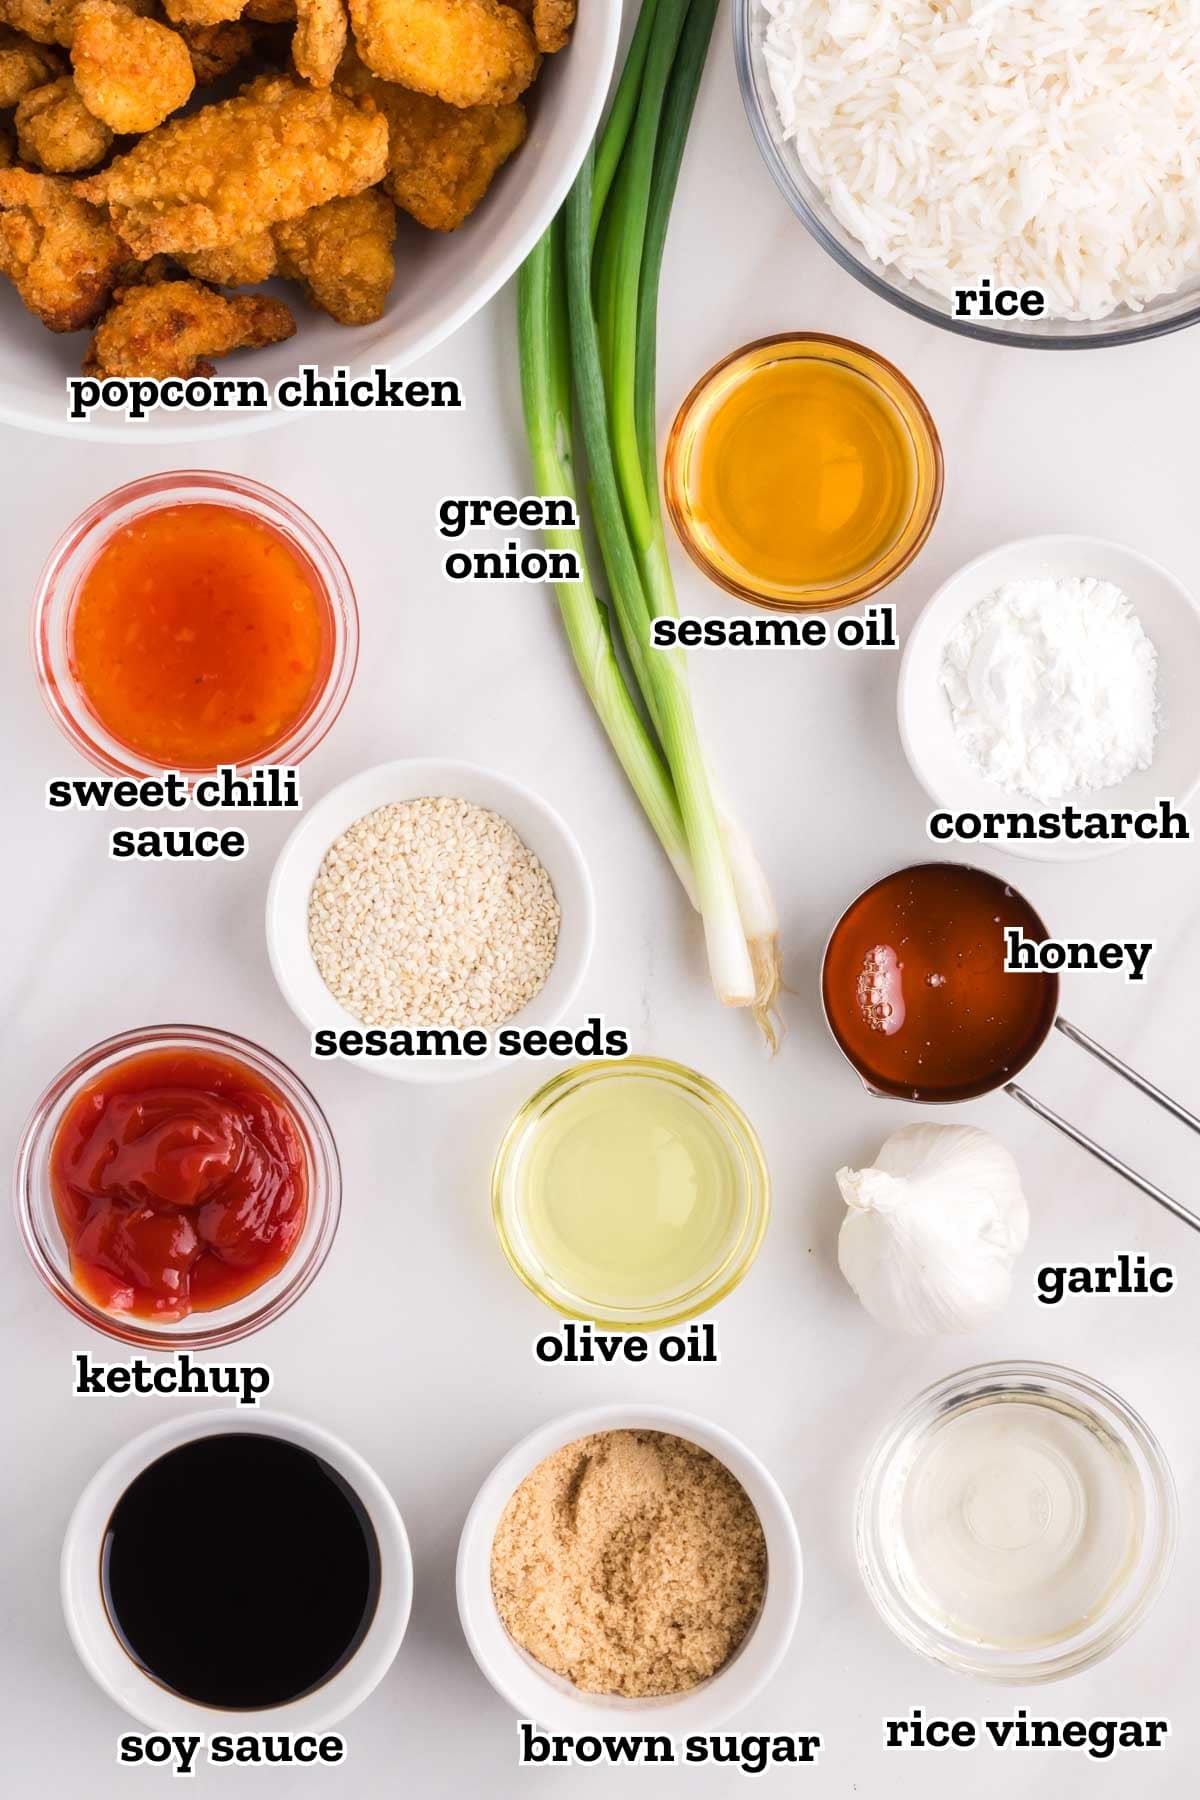 Labeled ingredients needed to make easy sesame chicken.